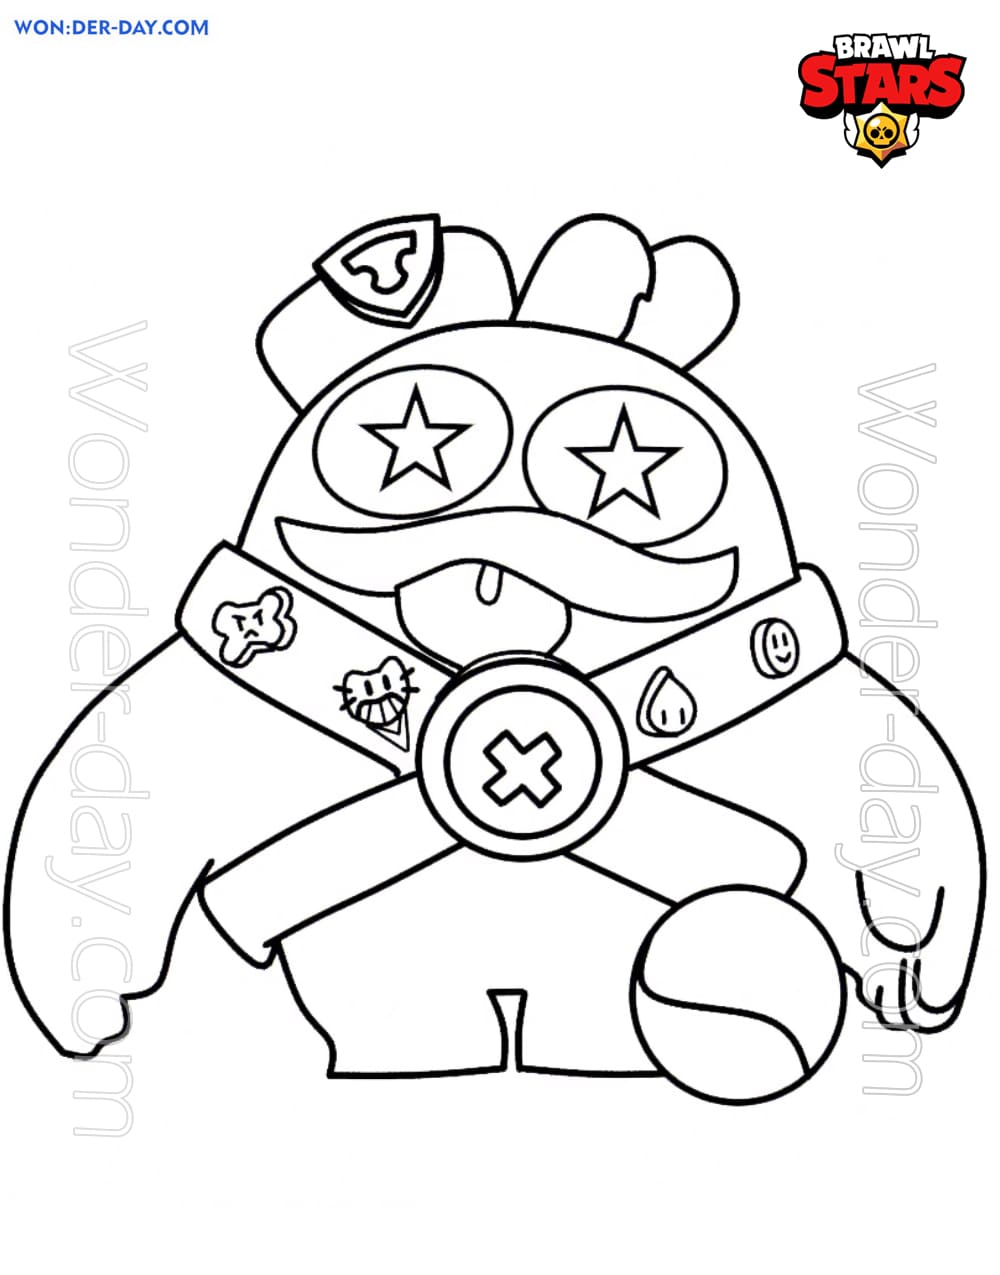 Squeak Brawl Stars Coloring Pages Wonder Day Coloring Pages For Children And Adults - brawl star squeak wallpaper